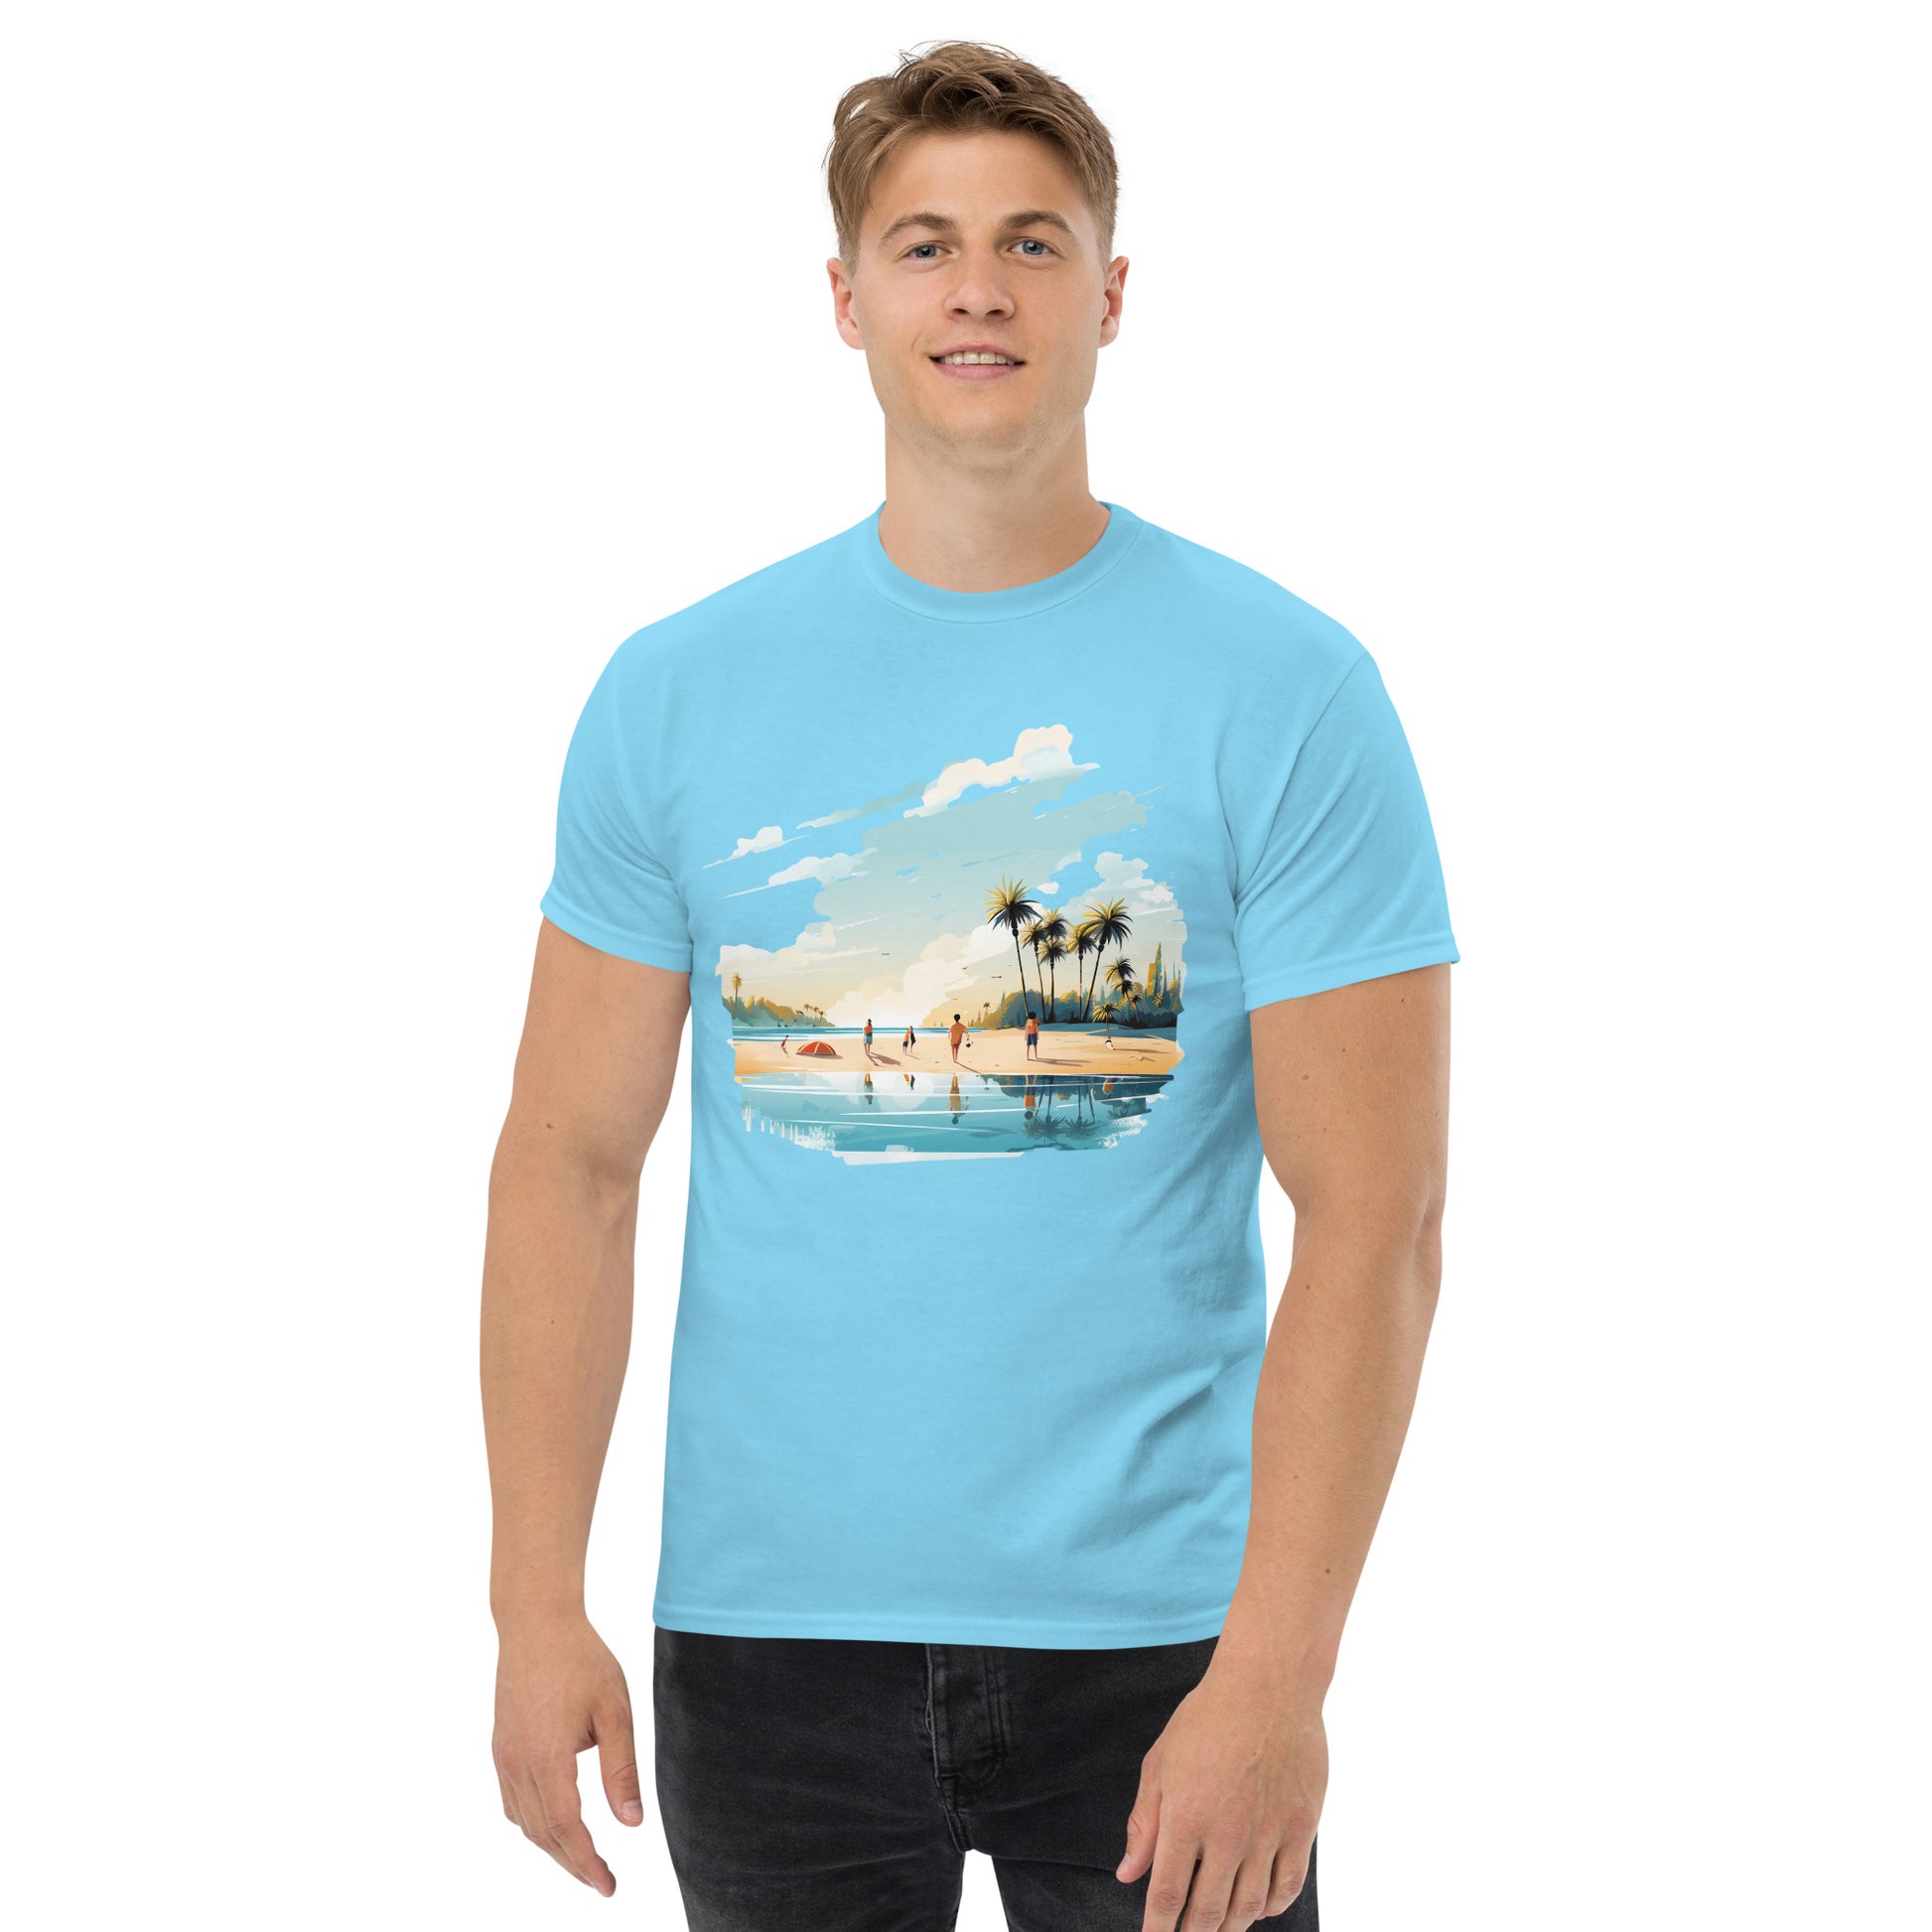 Men with sky blue T-shirt and a picture of a island with sea and sand